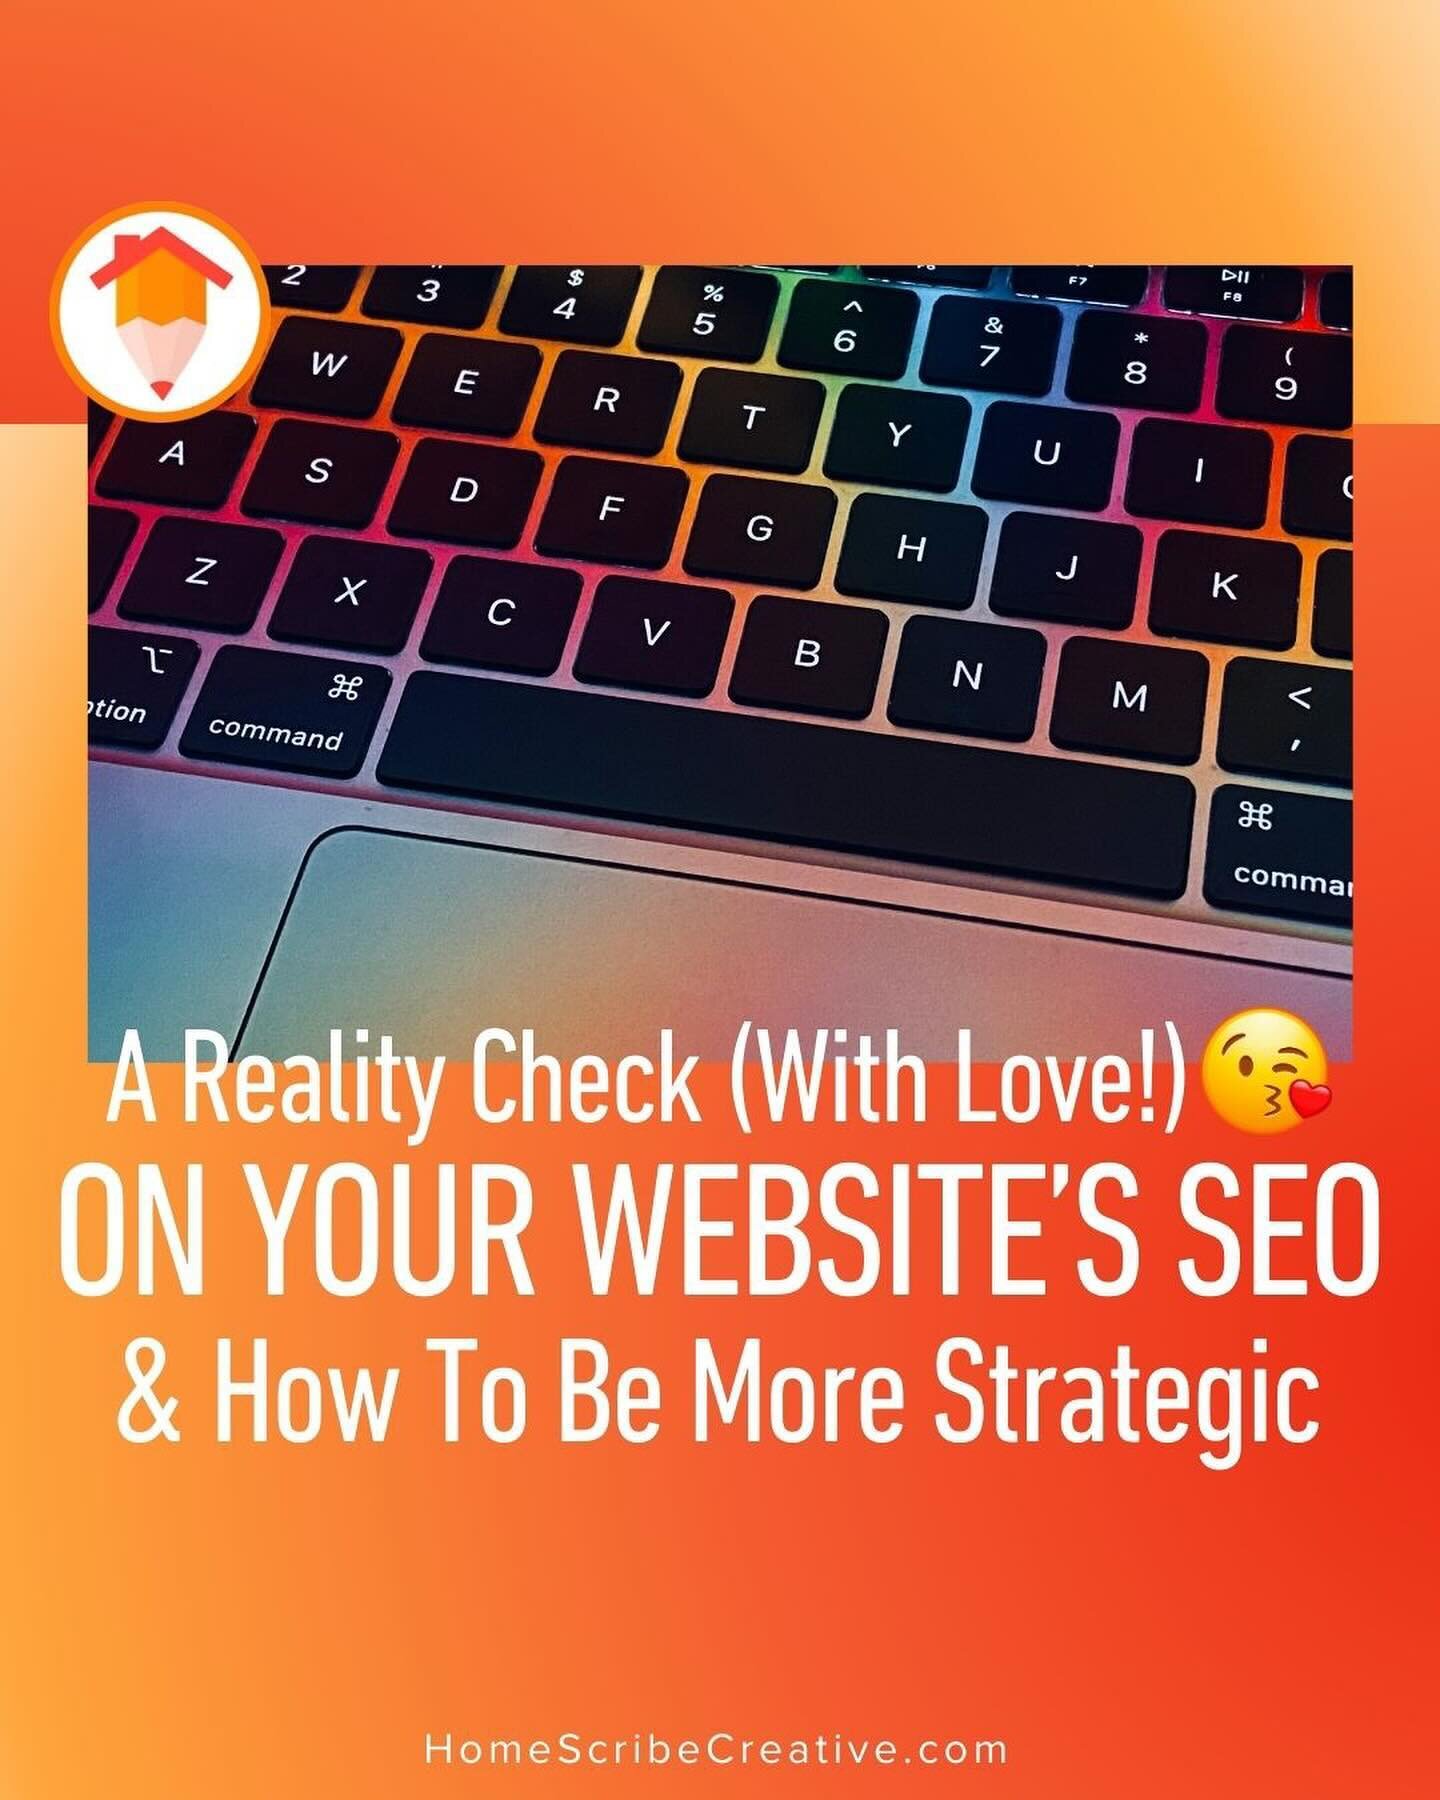 💻 Over the years, I&rsquo;ve heard from many real estate agents who talk about wanting &ldquo;to blog and work on their SEO.&rdquo; 

And as someone who is a nerd about online real estate marketing, that&rsquo;s always exciting to hear! 🤓 

However